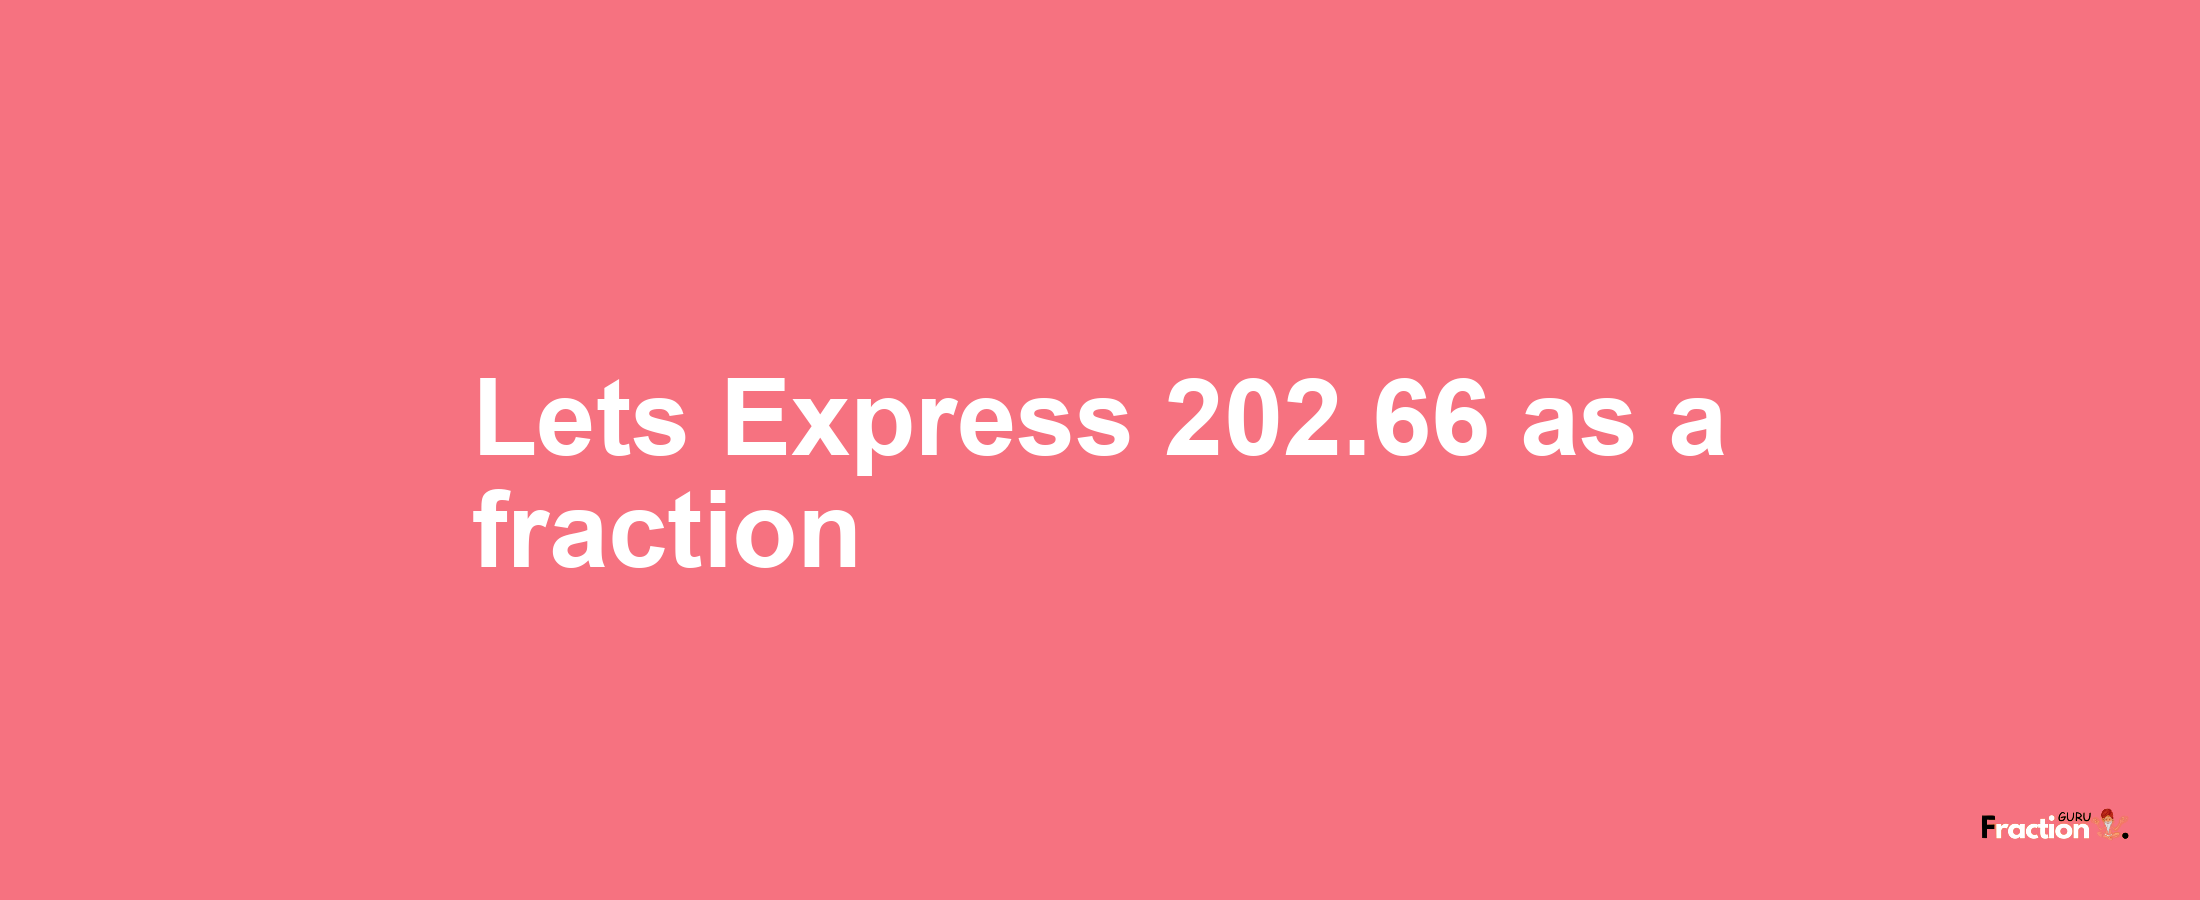 Lets Express 202.66 as afraction